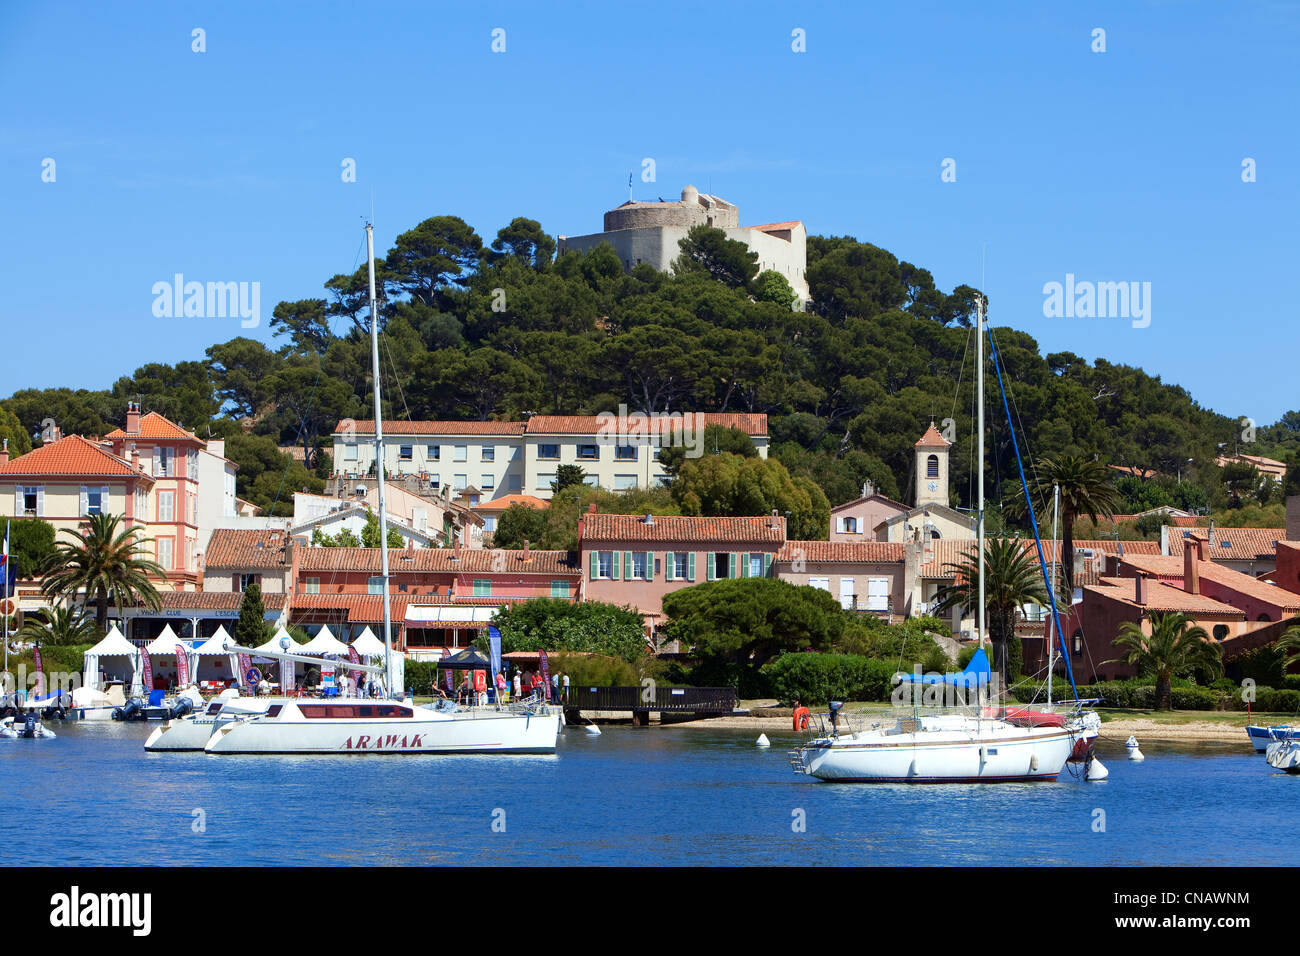 France, Var, Iles d'Hyeres, National Park of Port Cros, Porquerolles island, port, village and fort of St. Agatha in the Stock Photo